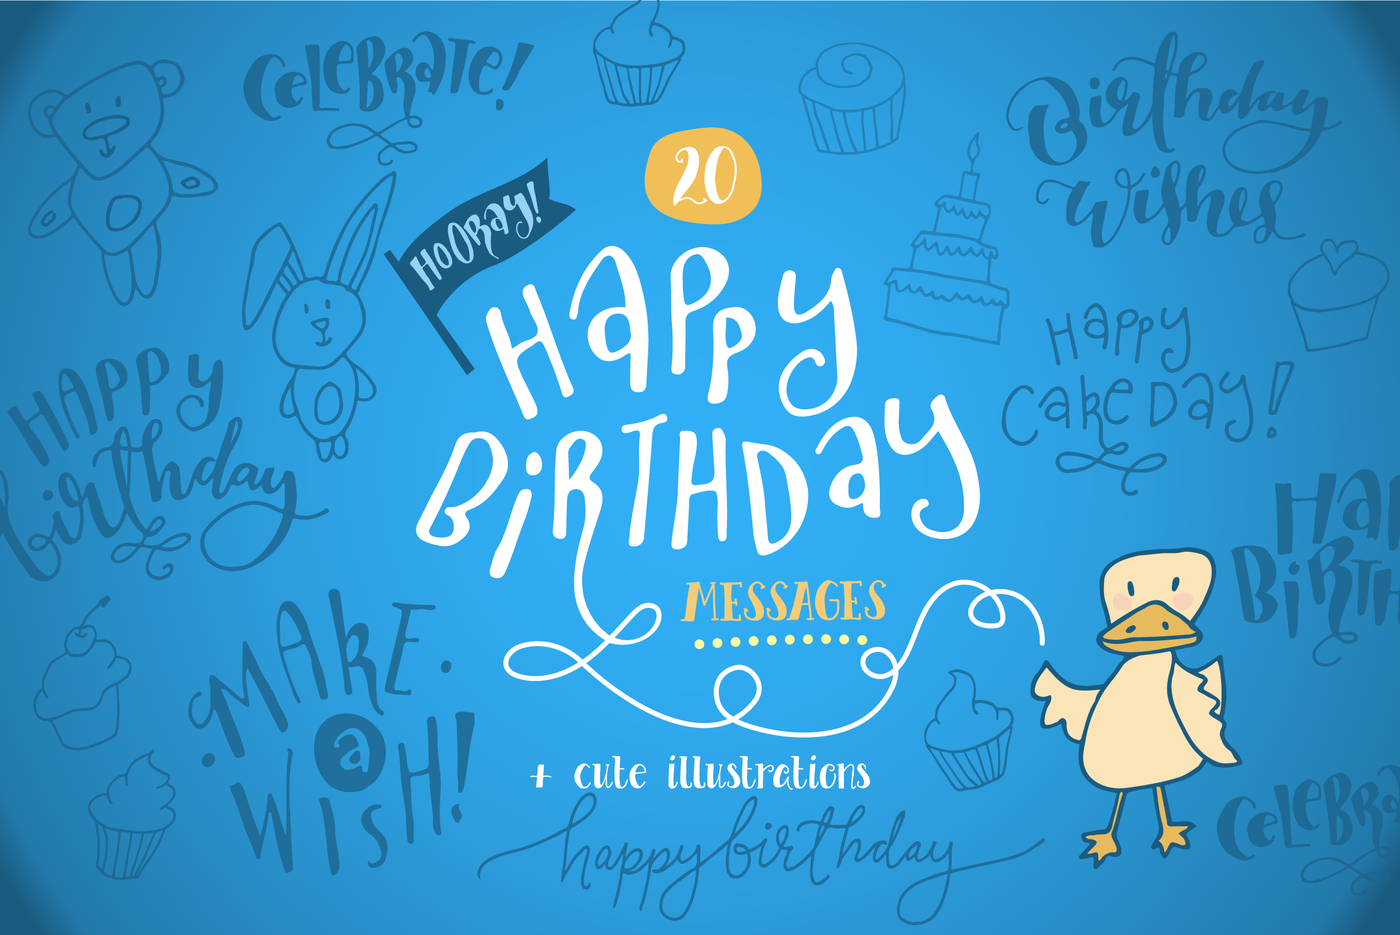 Happy Birthday, Birthday PNG Files for Sublimation Printing, Happy Birthday  Png, Birthday Sublimation, Hand Drawn Png -  Sweden